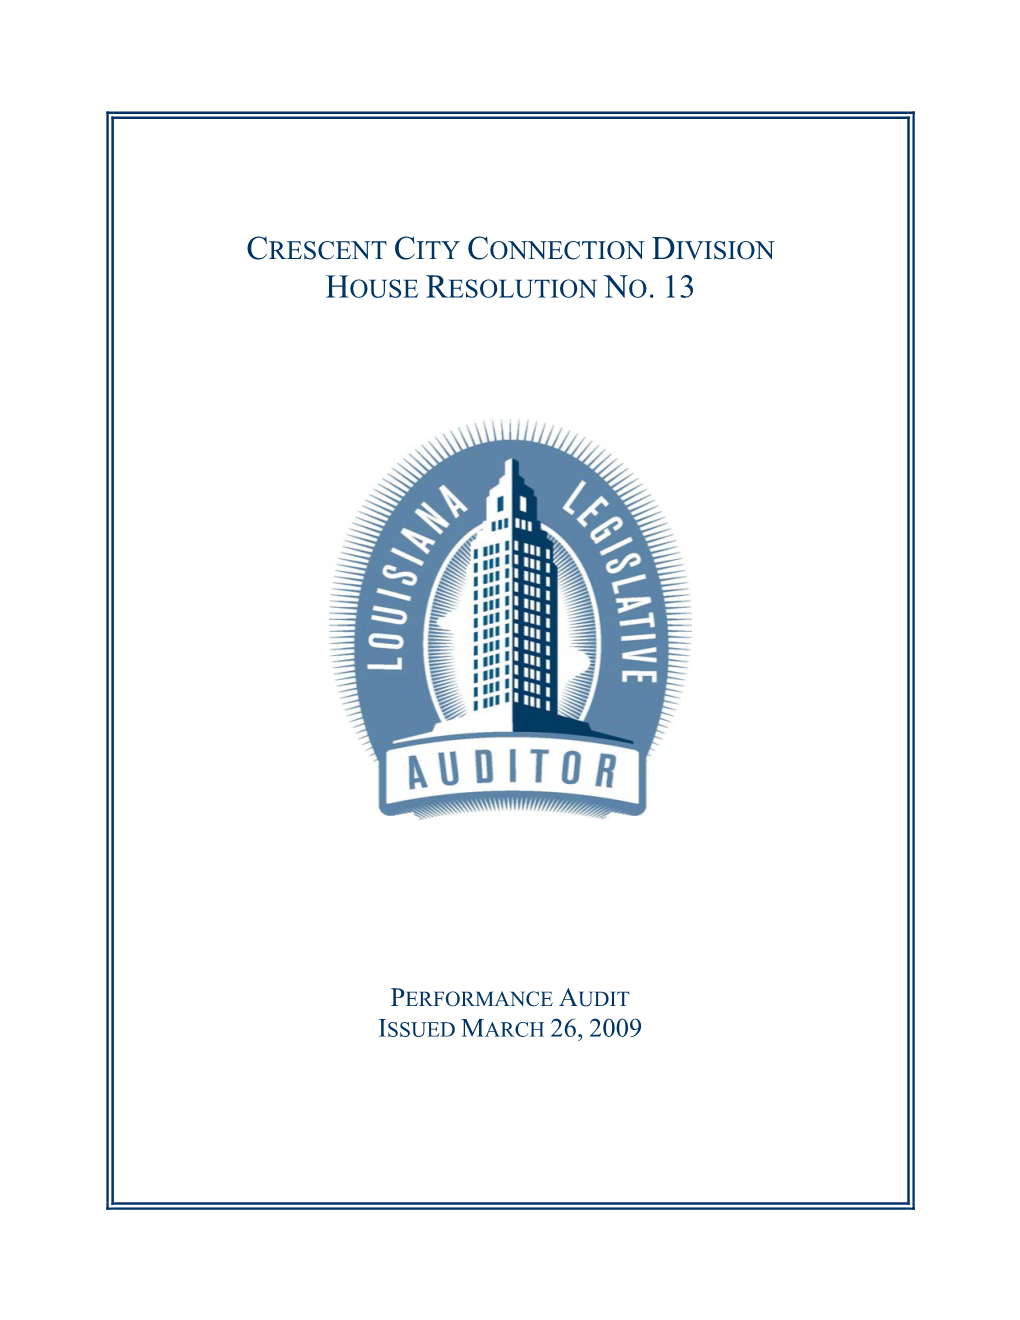 Crescent City Connection Division House Resolution No